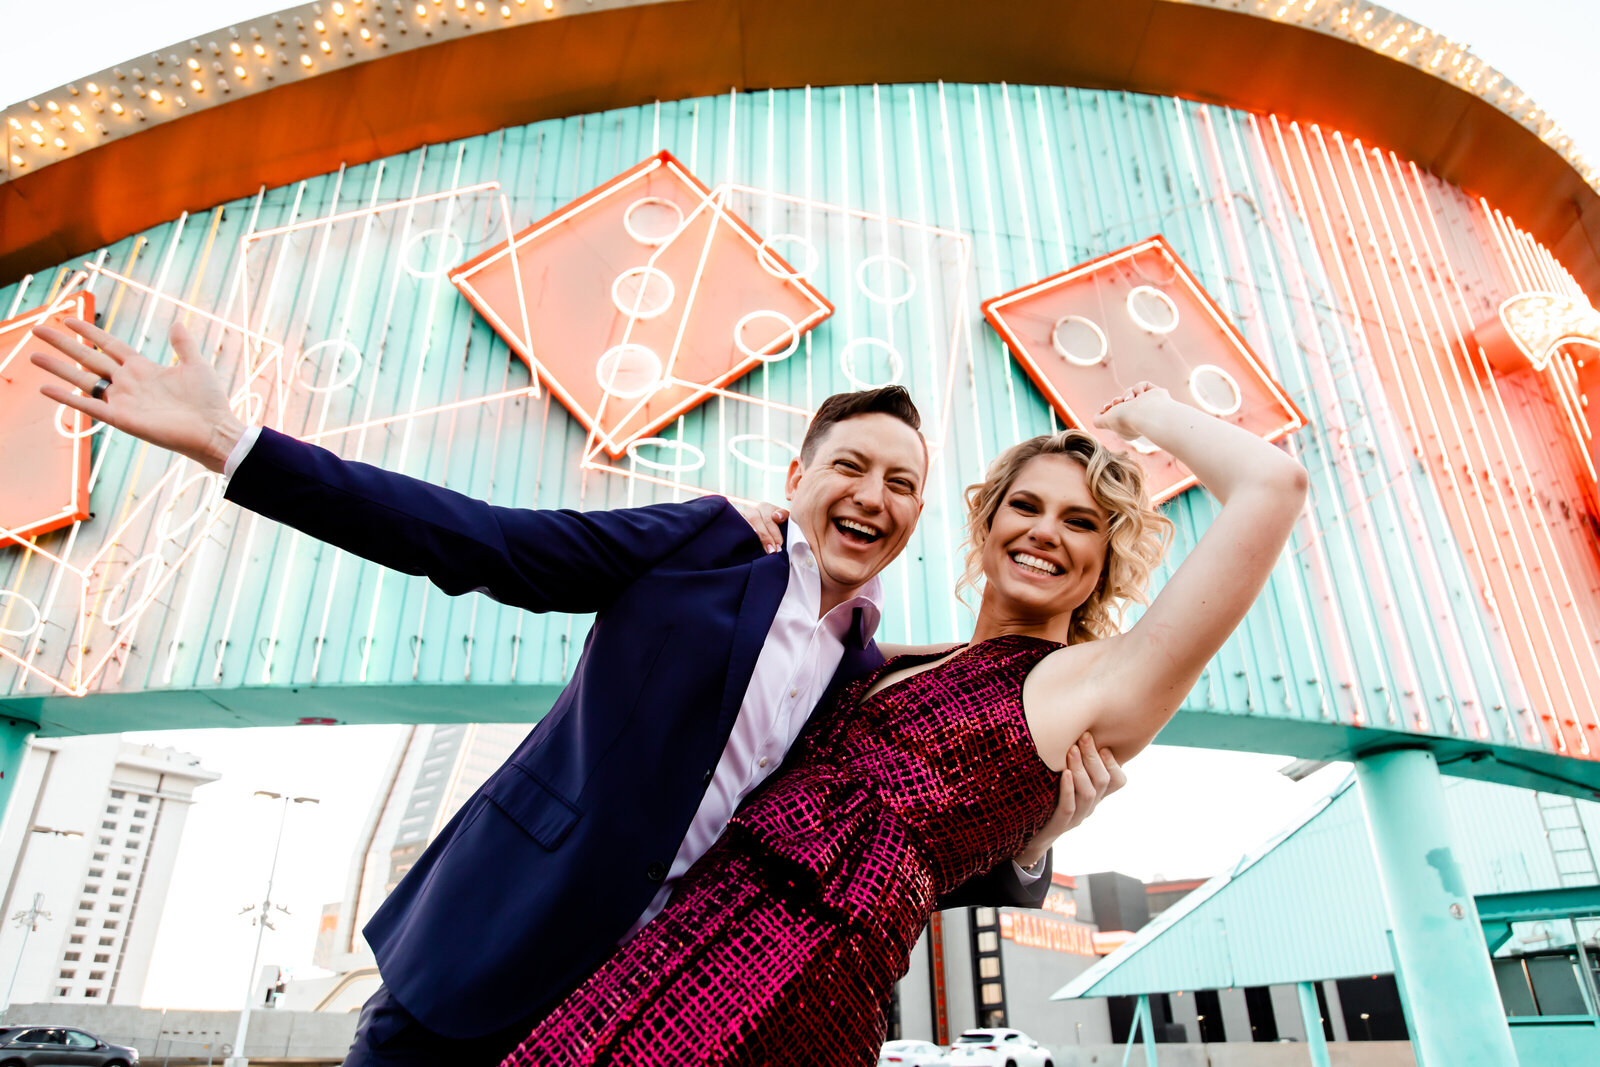 This couple posed in front of Neon signs for their Downtown Las Vegas engagement session